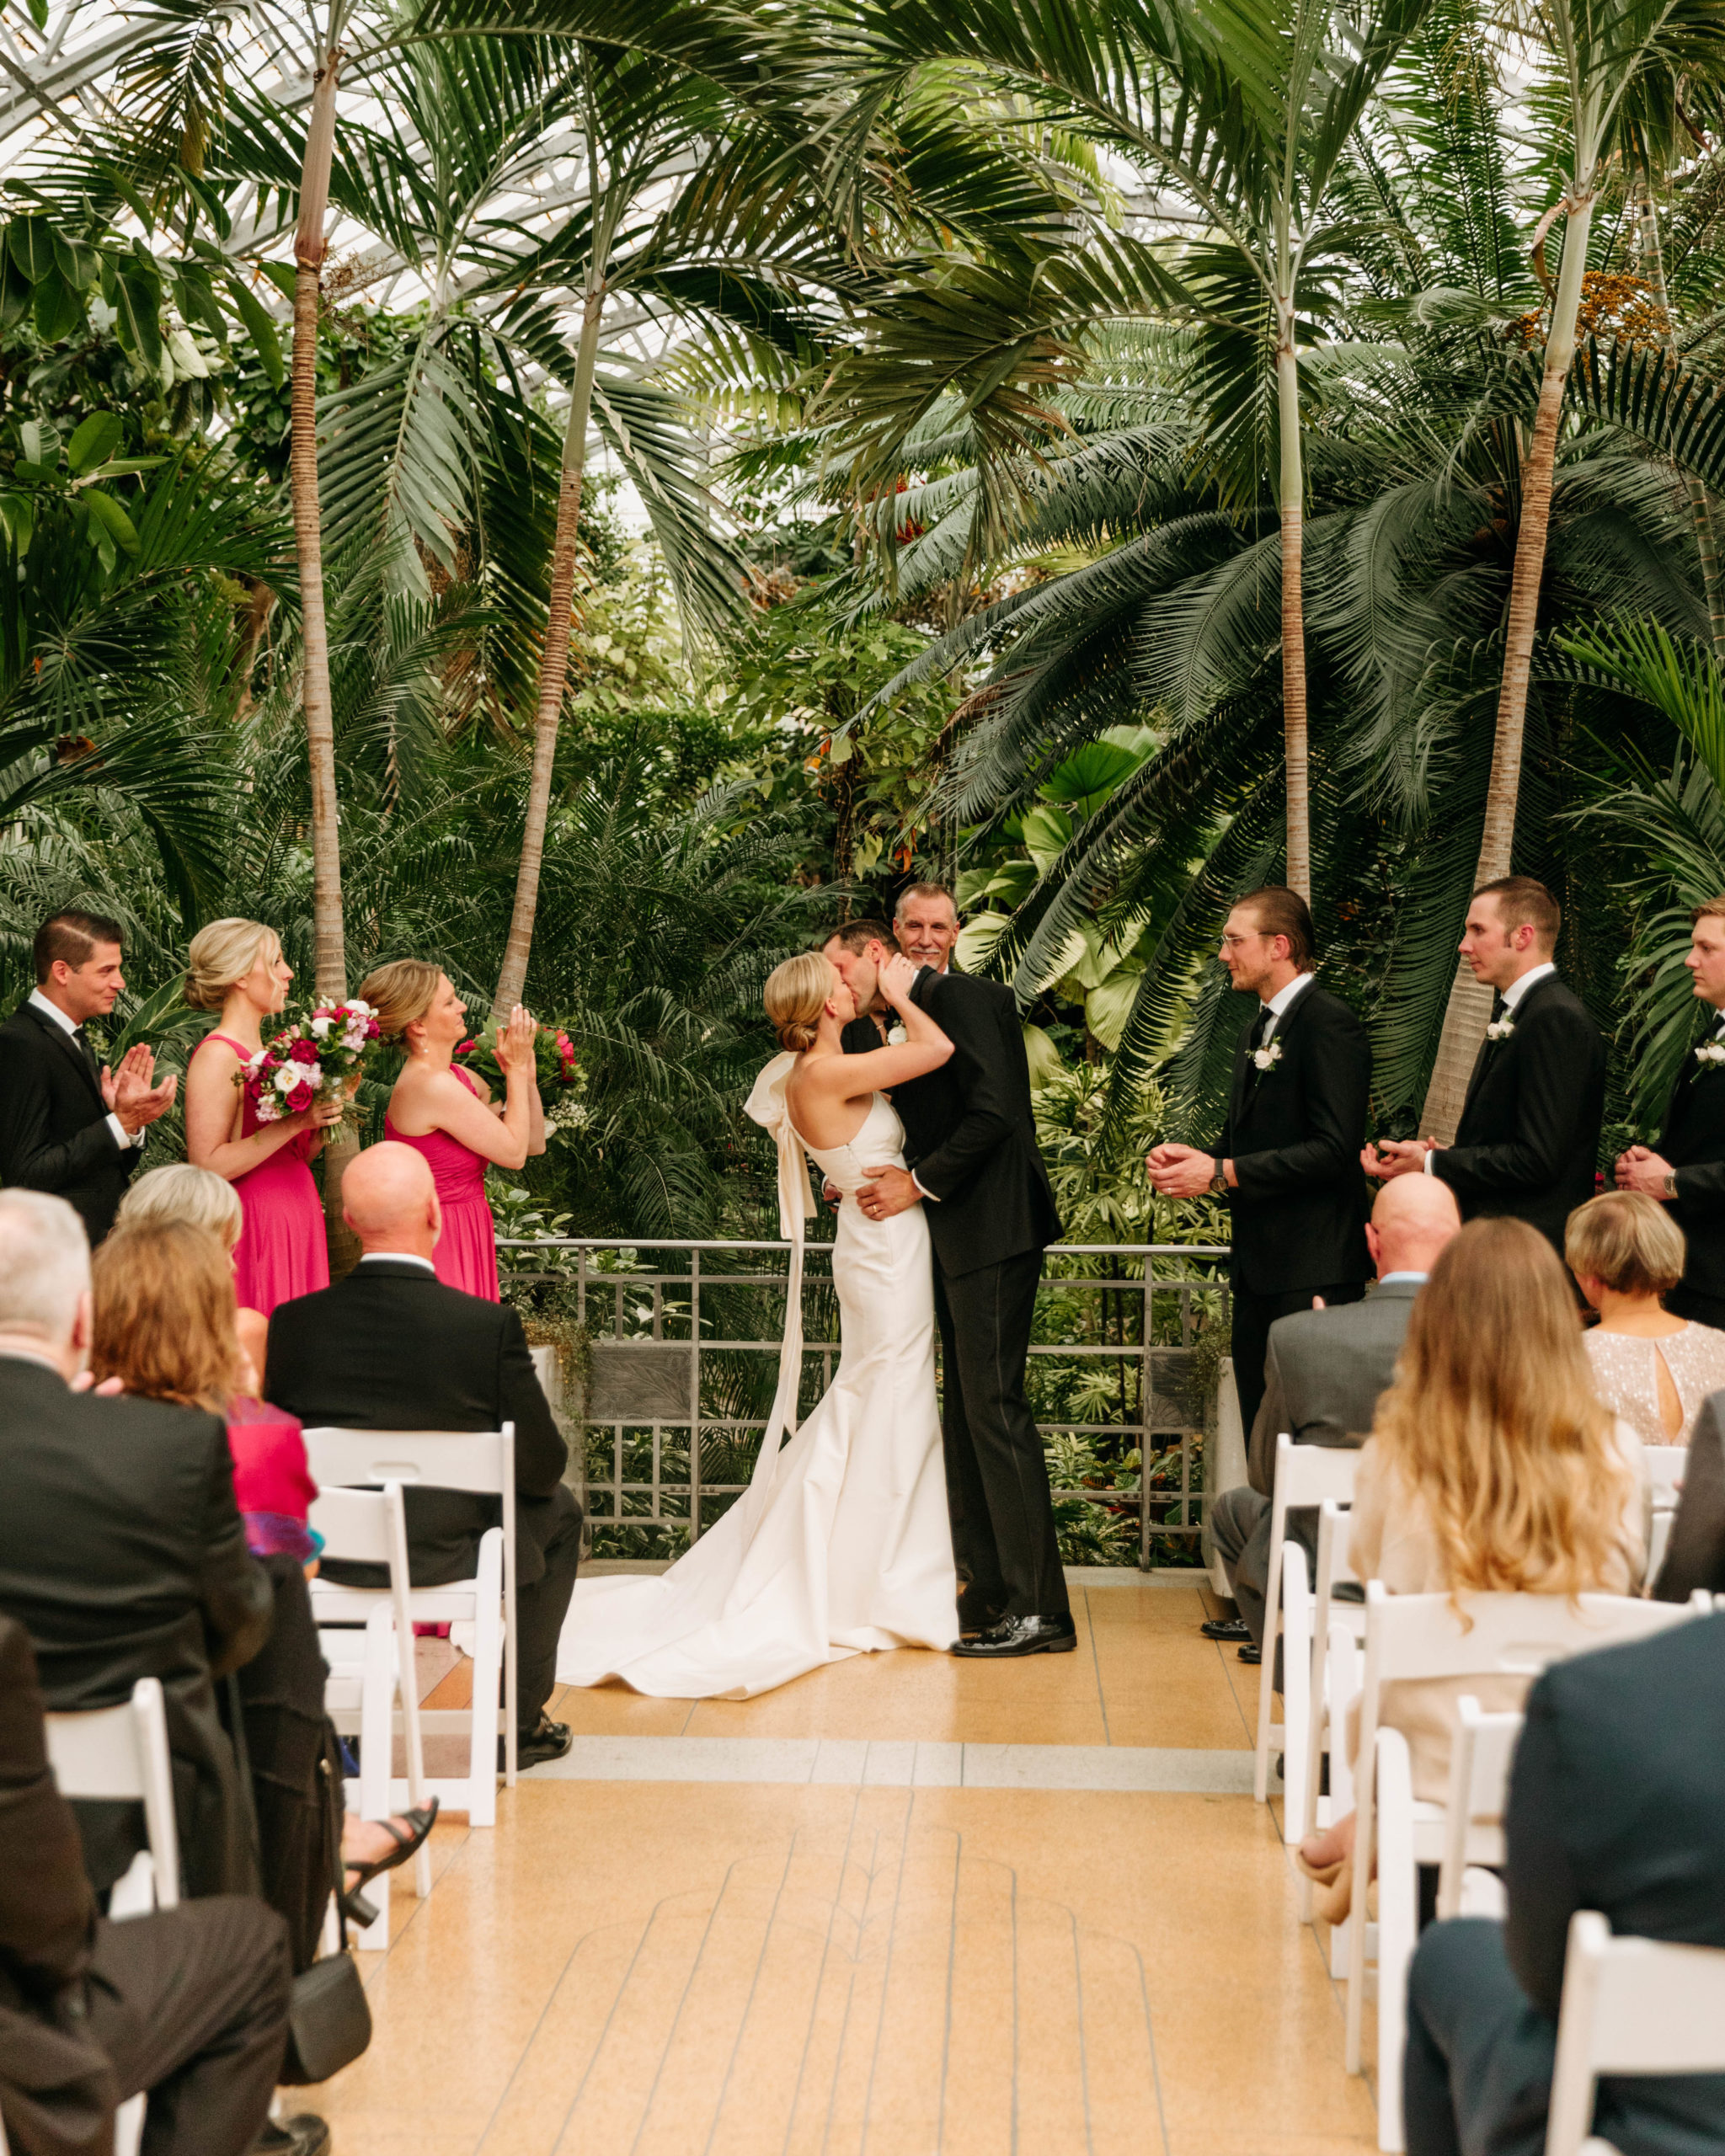 The 'First Kiss' at the wedding ceremony of Christen and Steven at the Krohn Conservatory Wedding Venue. 